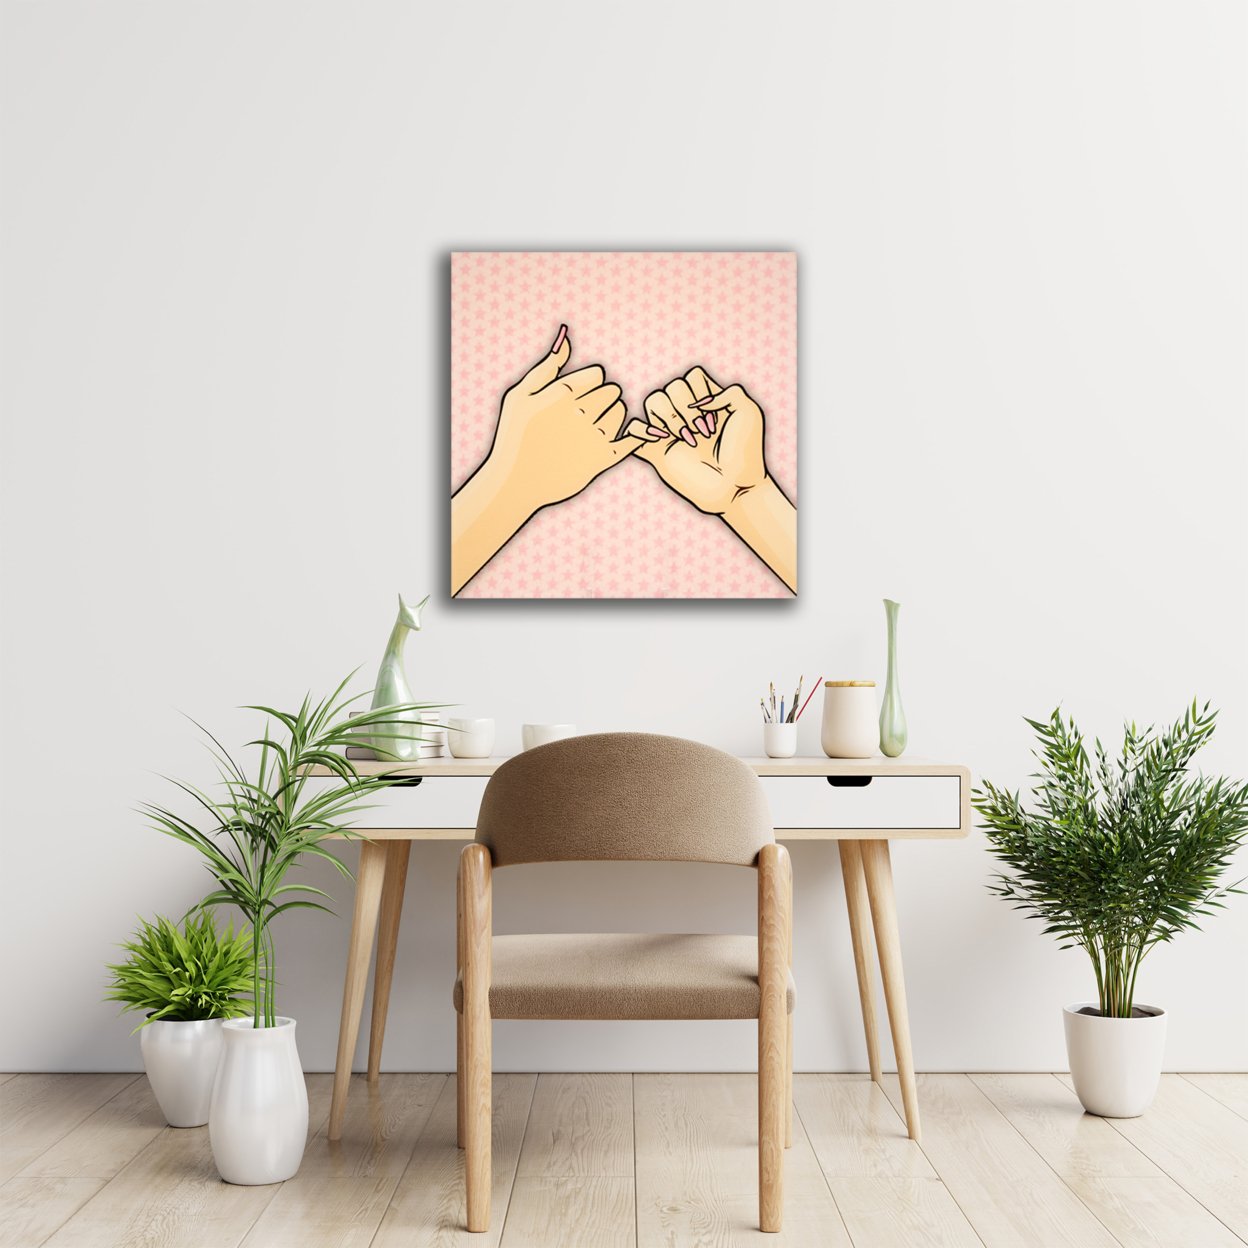 Matashi 5D Multi-Dimensional Wall Art - Custom Made Pinky Promise Wall Art Print On Strong Polycarbonate Panel W/ Vibrant Colors (12x12 In)